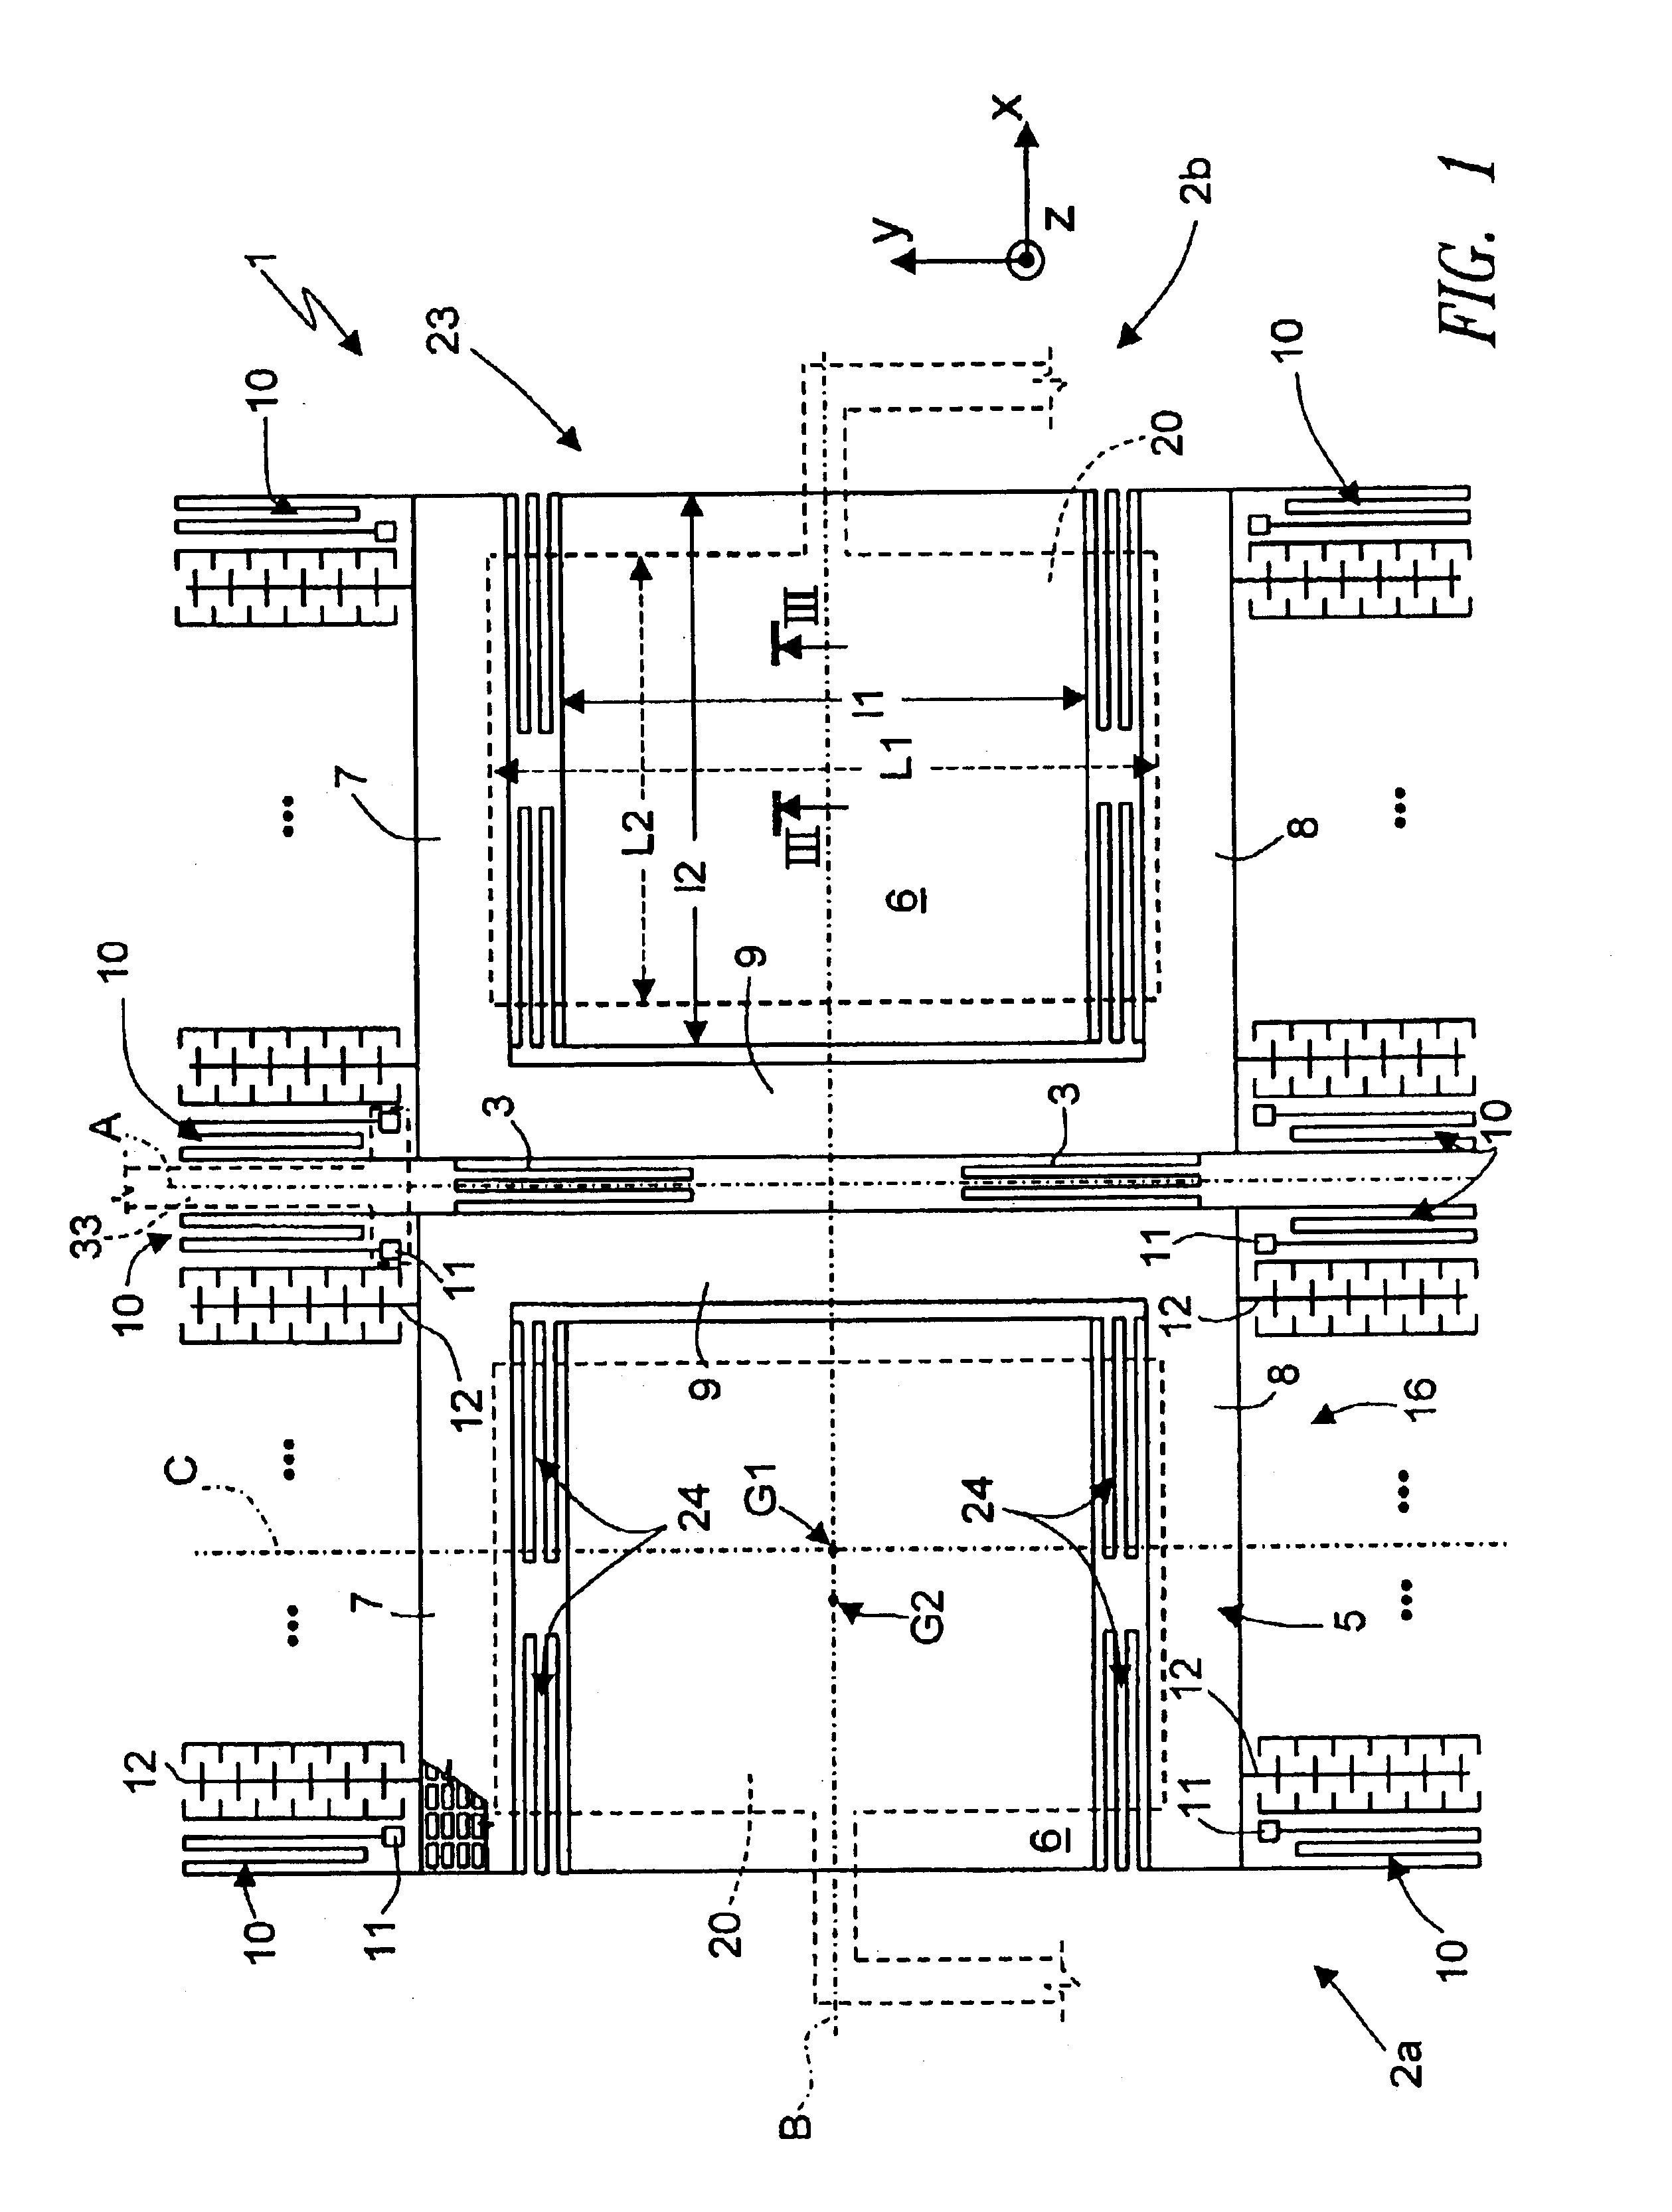 Integrated gyroscope of semiconductor material with at least one sensitive axis in the sensor plane